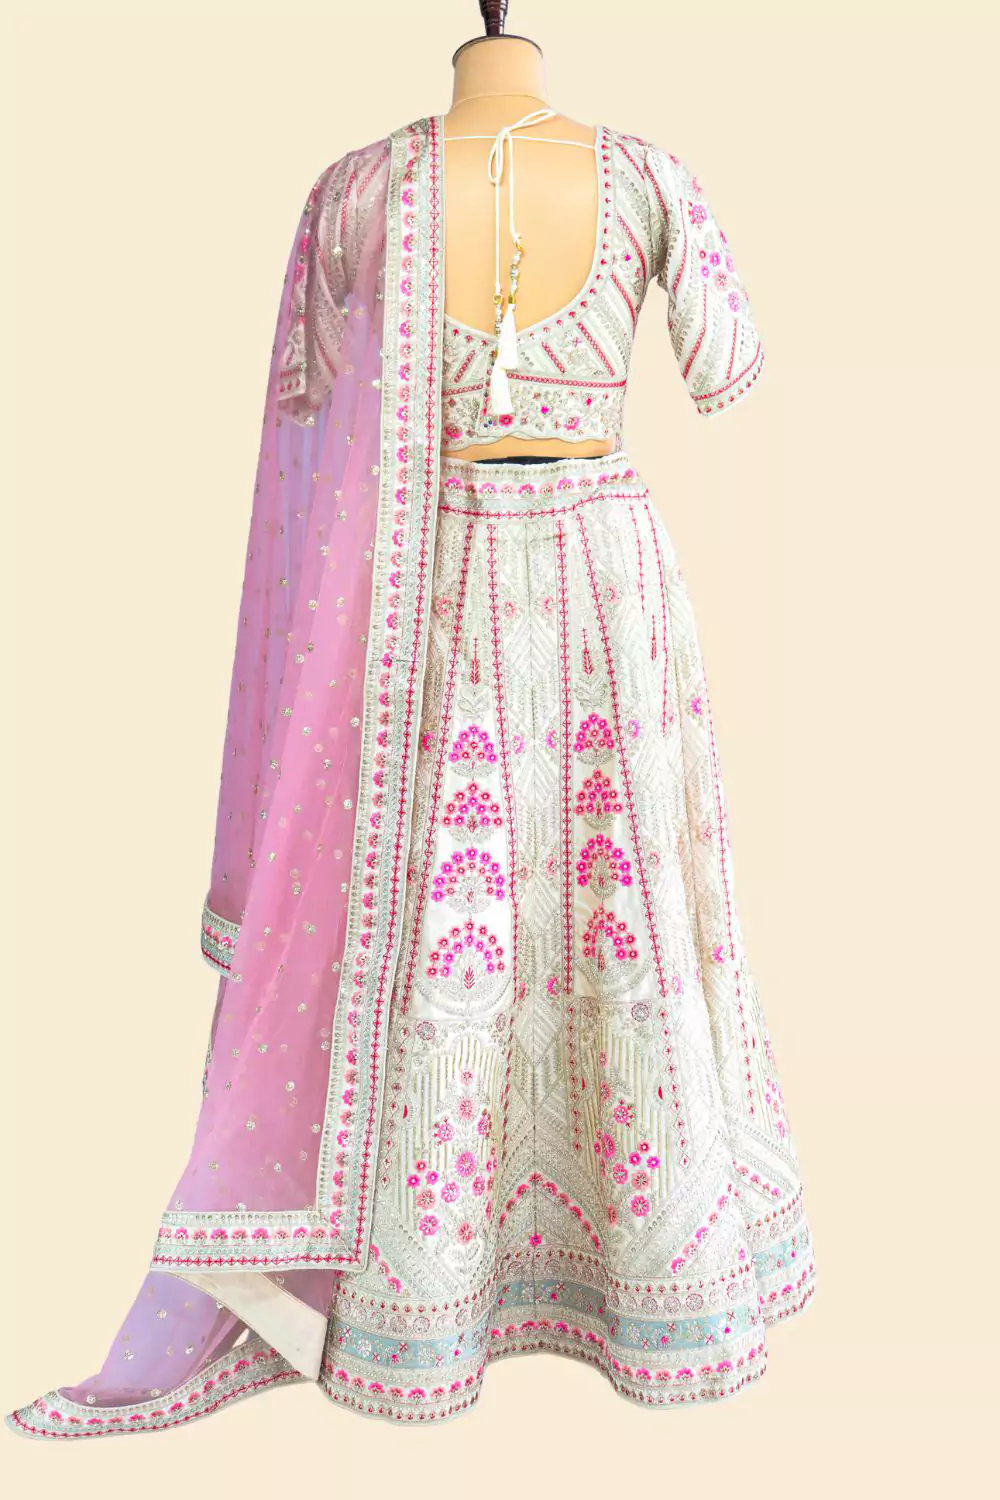 Off-White and Pink Embroidered Lehenga